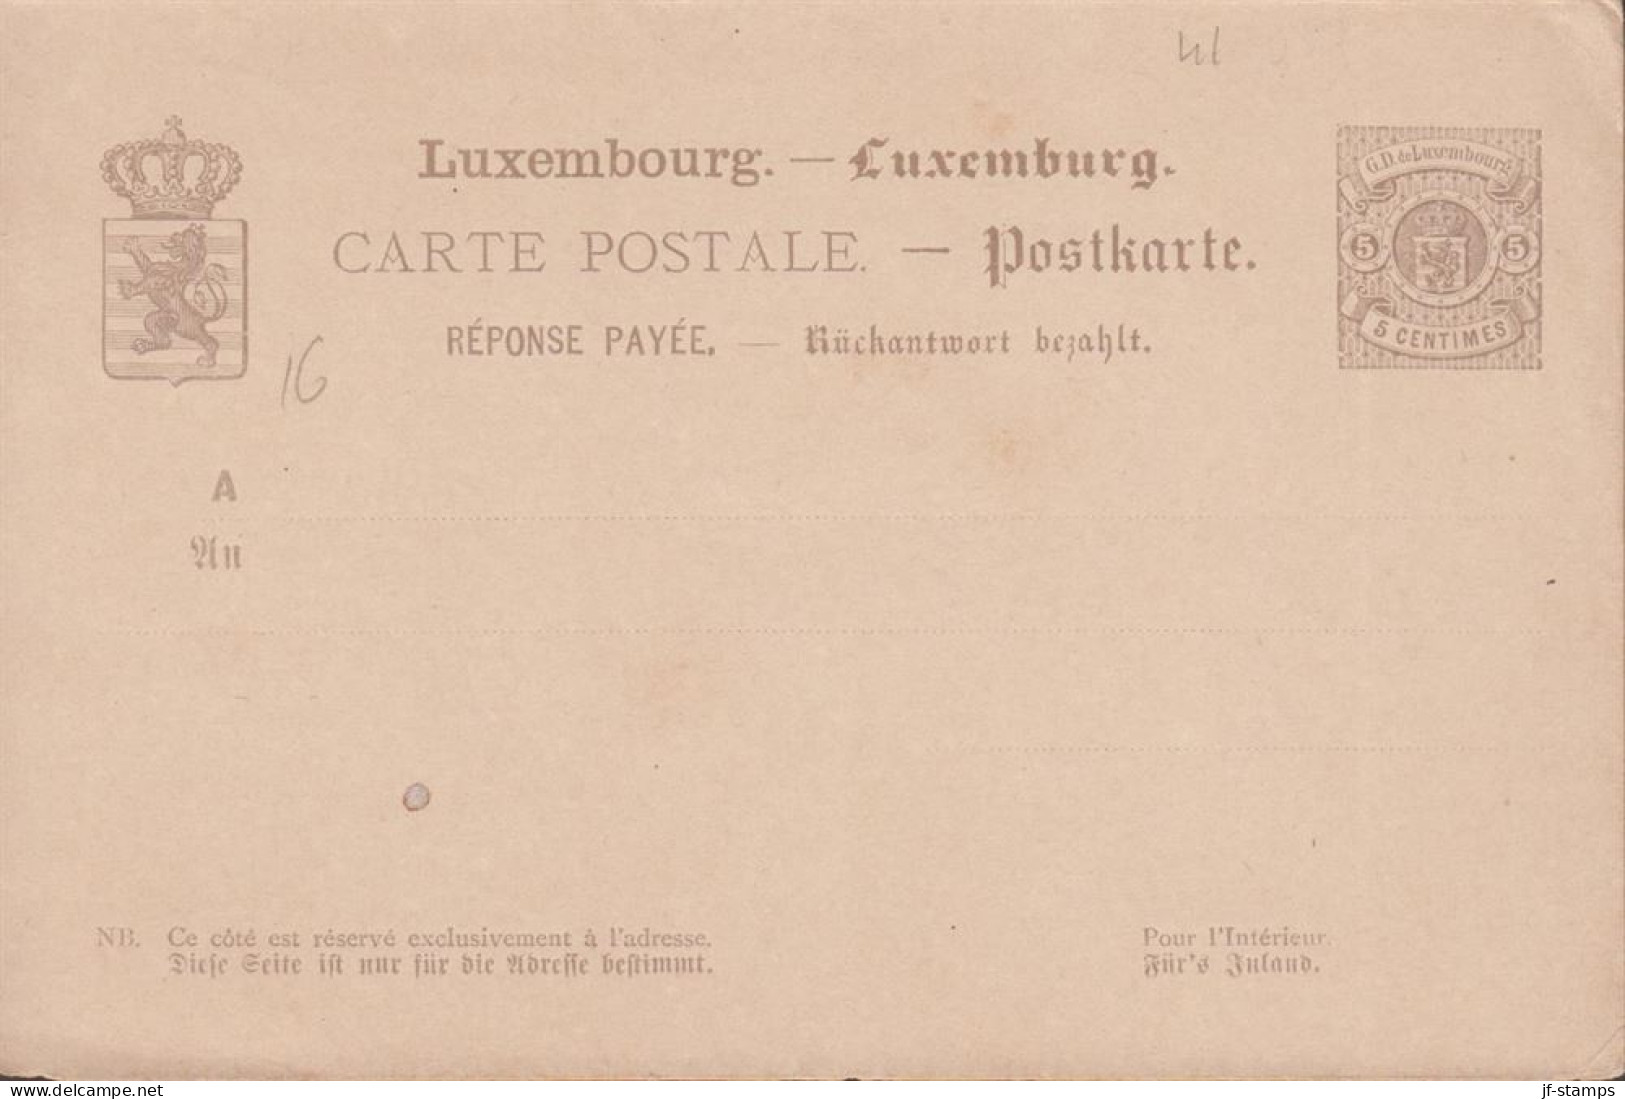 1881. LUXEMBOURG. CARTE POSTALE. 5 CENTIMES Double Card With RESPONSE PAYEE.  - JF445175 - Stamped Stationery